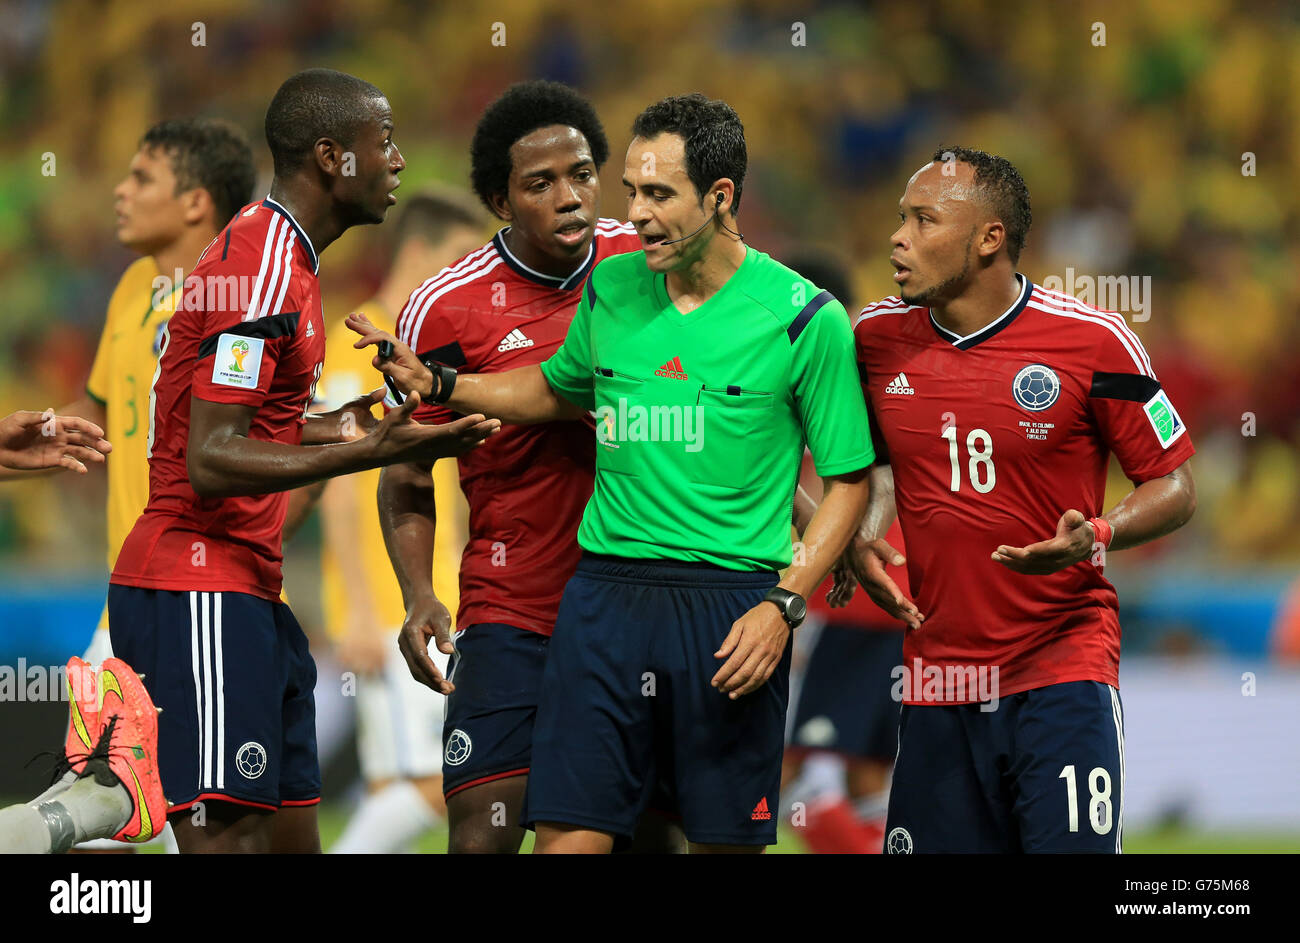 Colombia's Fredy Guarin (left) and Colombia's Juan Camilo Zuniga (right) argue with the referee during the quarter final match at the Estadio Castelao, Fortaleza. Stock Photo